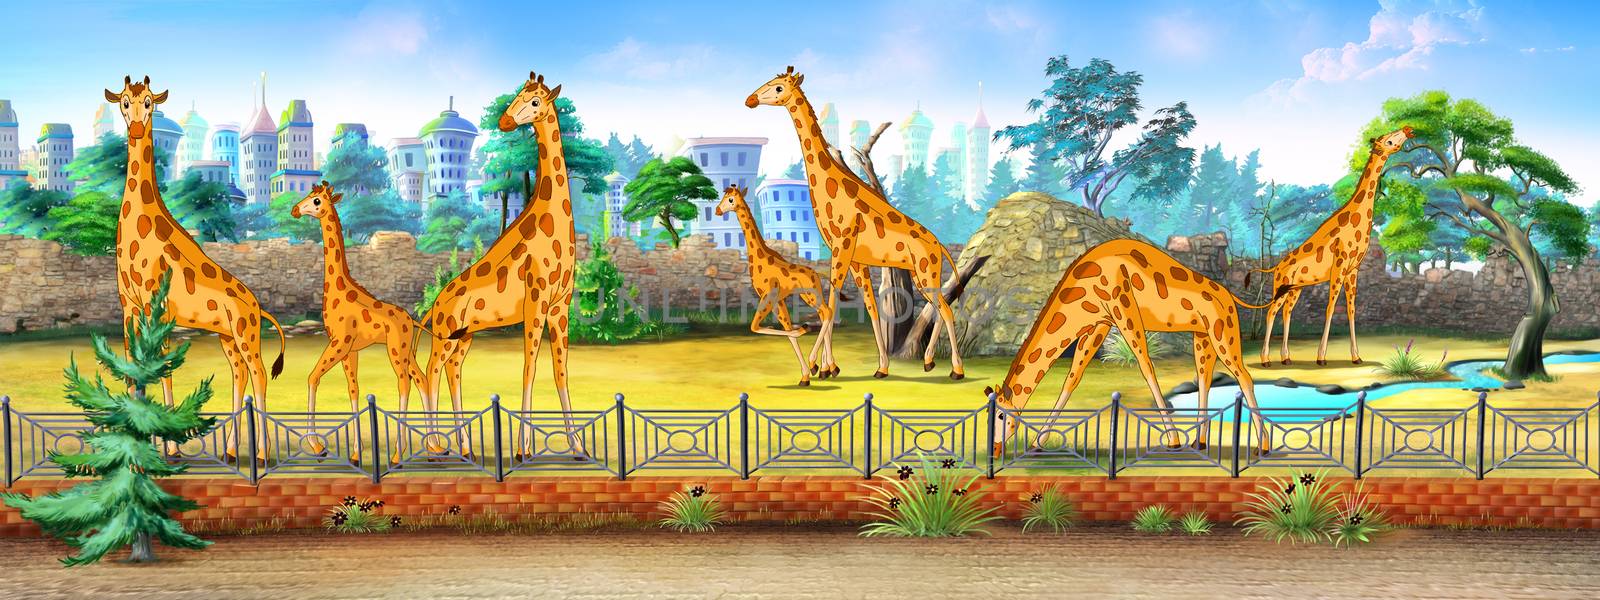 Giraffes in a Zoo full color illustration by Multipedia